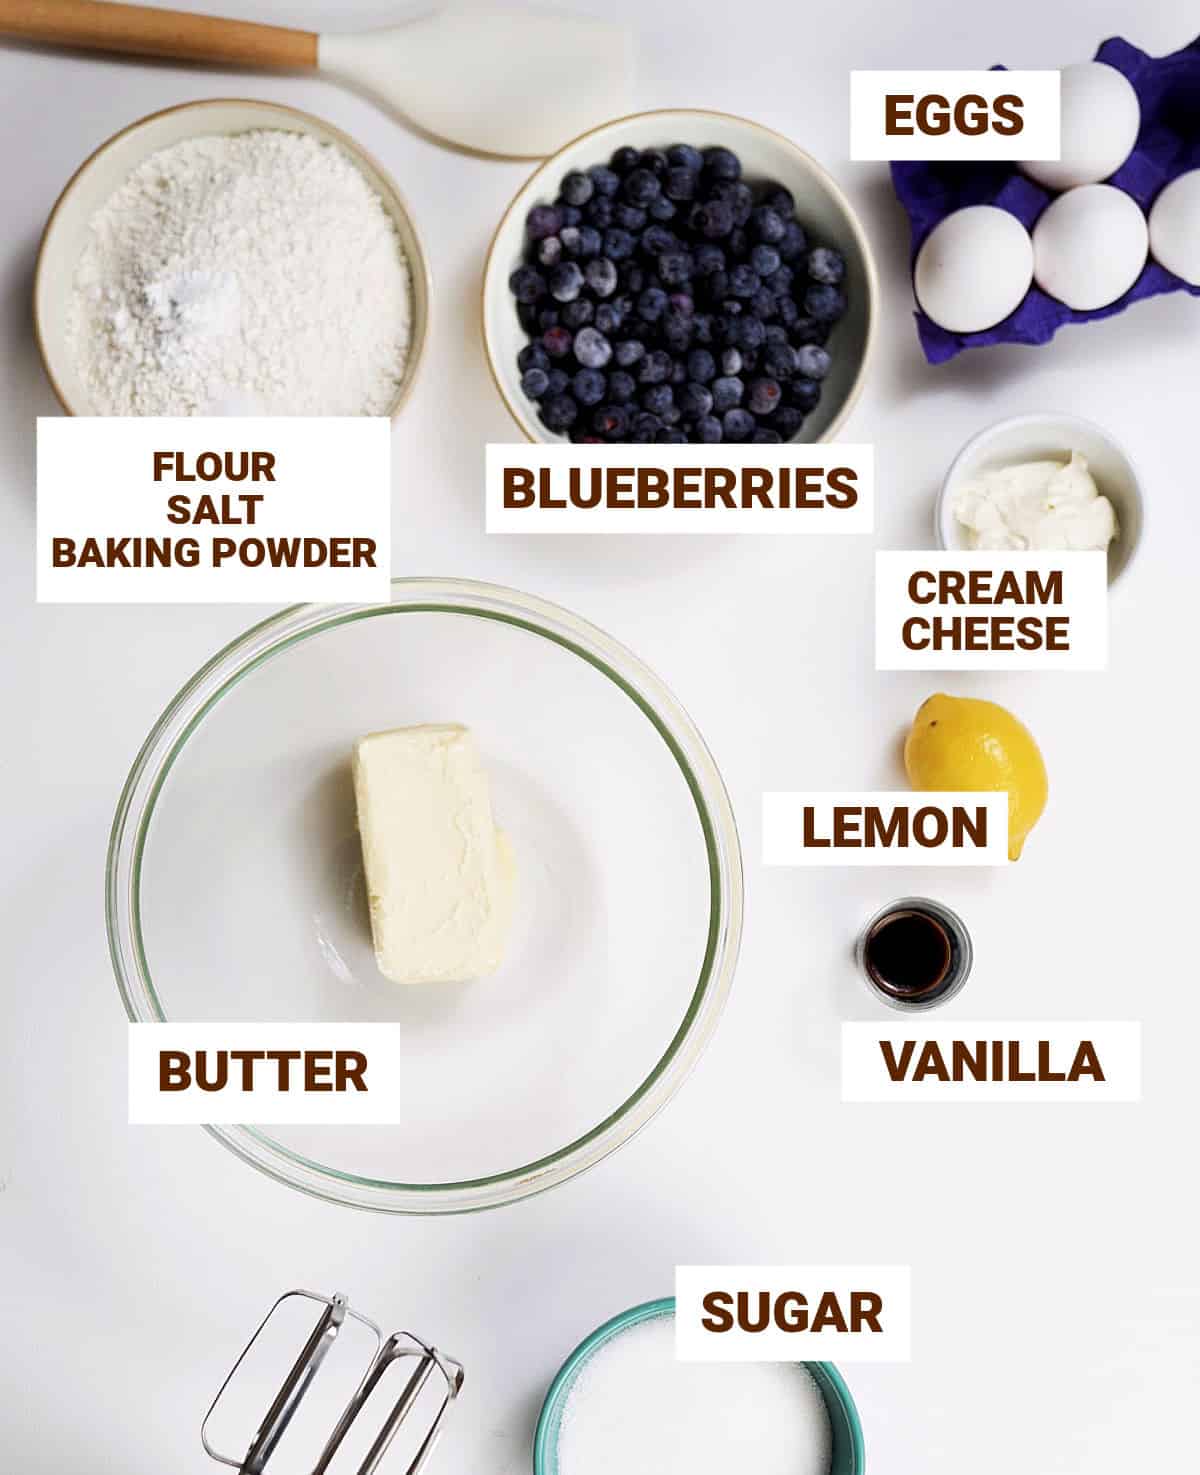 White surface with bowls containing lemon blueberry cake ingredients including butter, vanilla, flour mixture, sugar